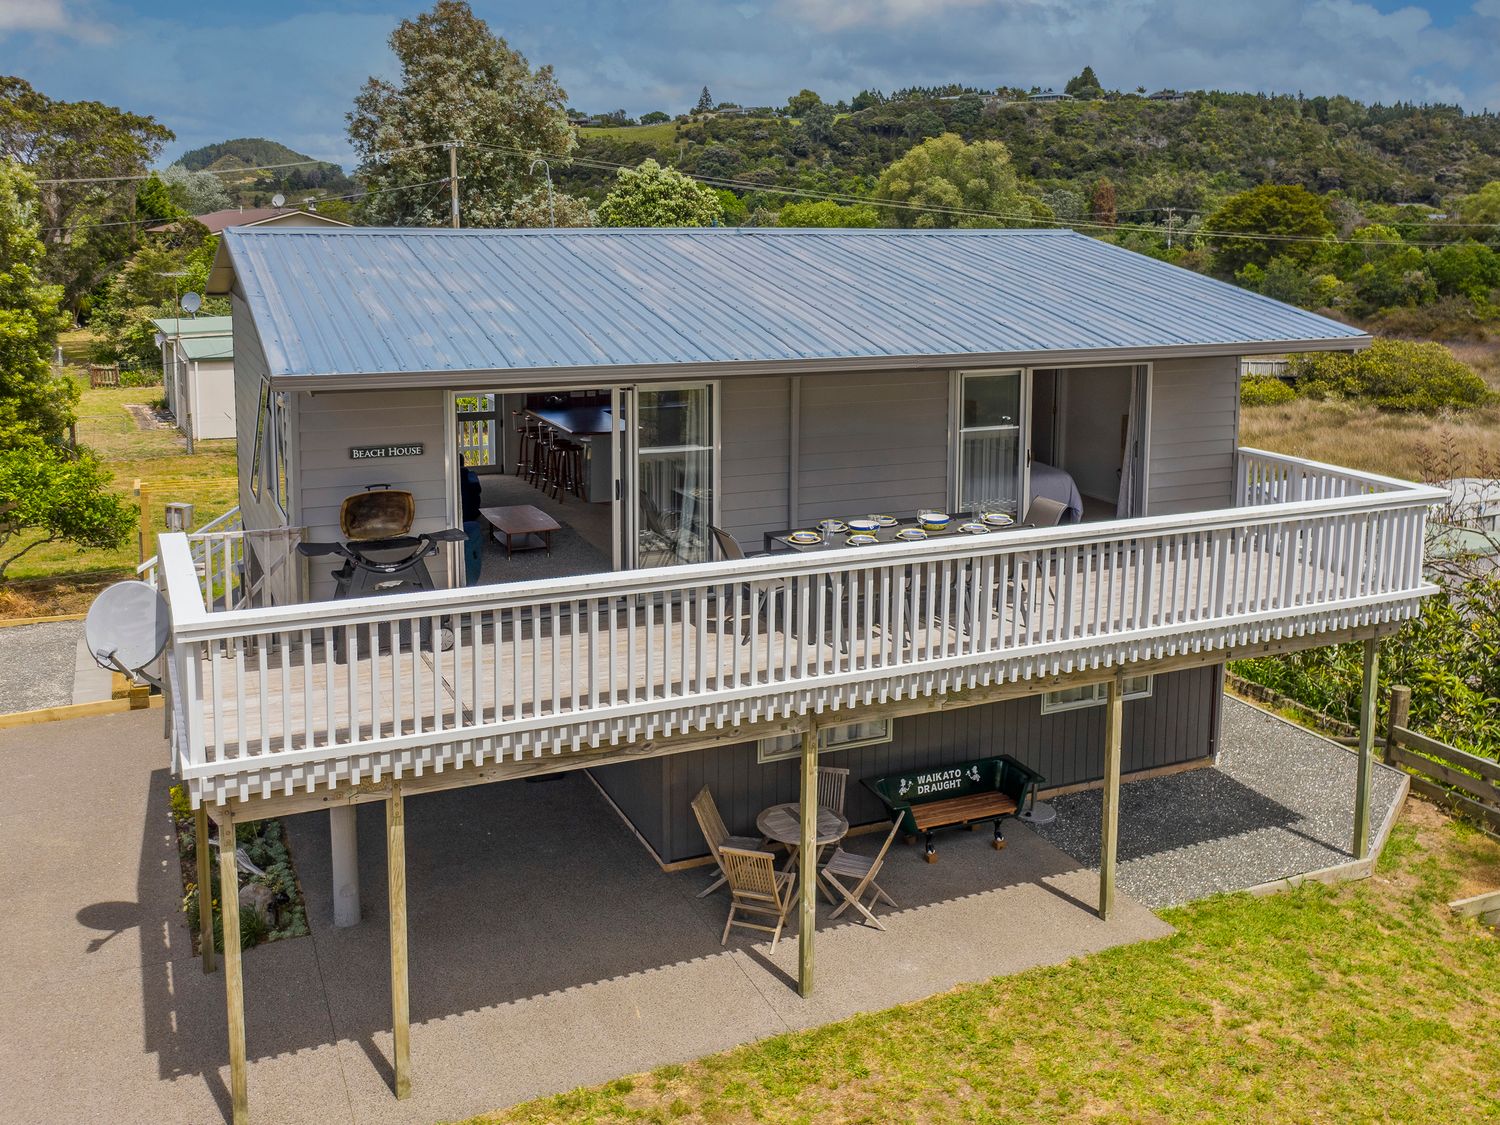 Recharge on Riverview - Cooks Beach Holiday Home -  - 1062810 - photo 1